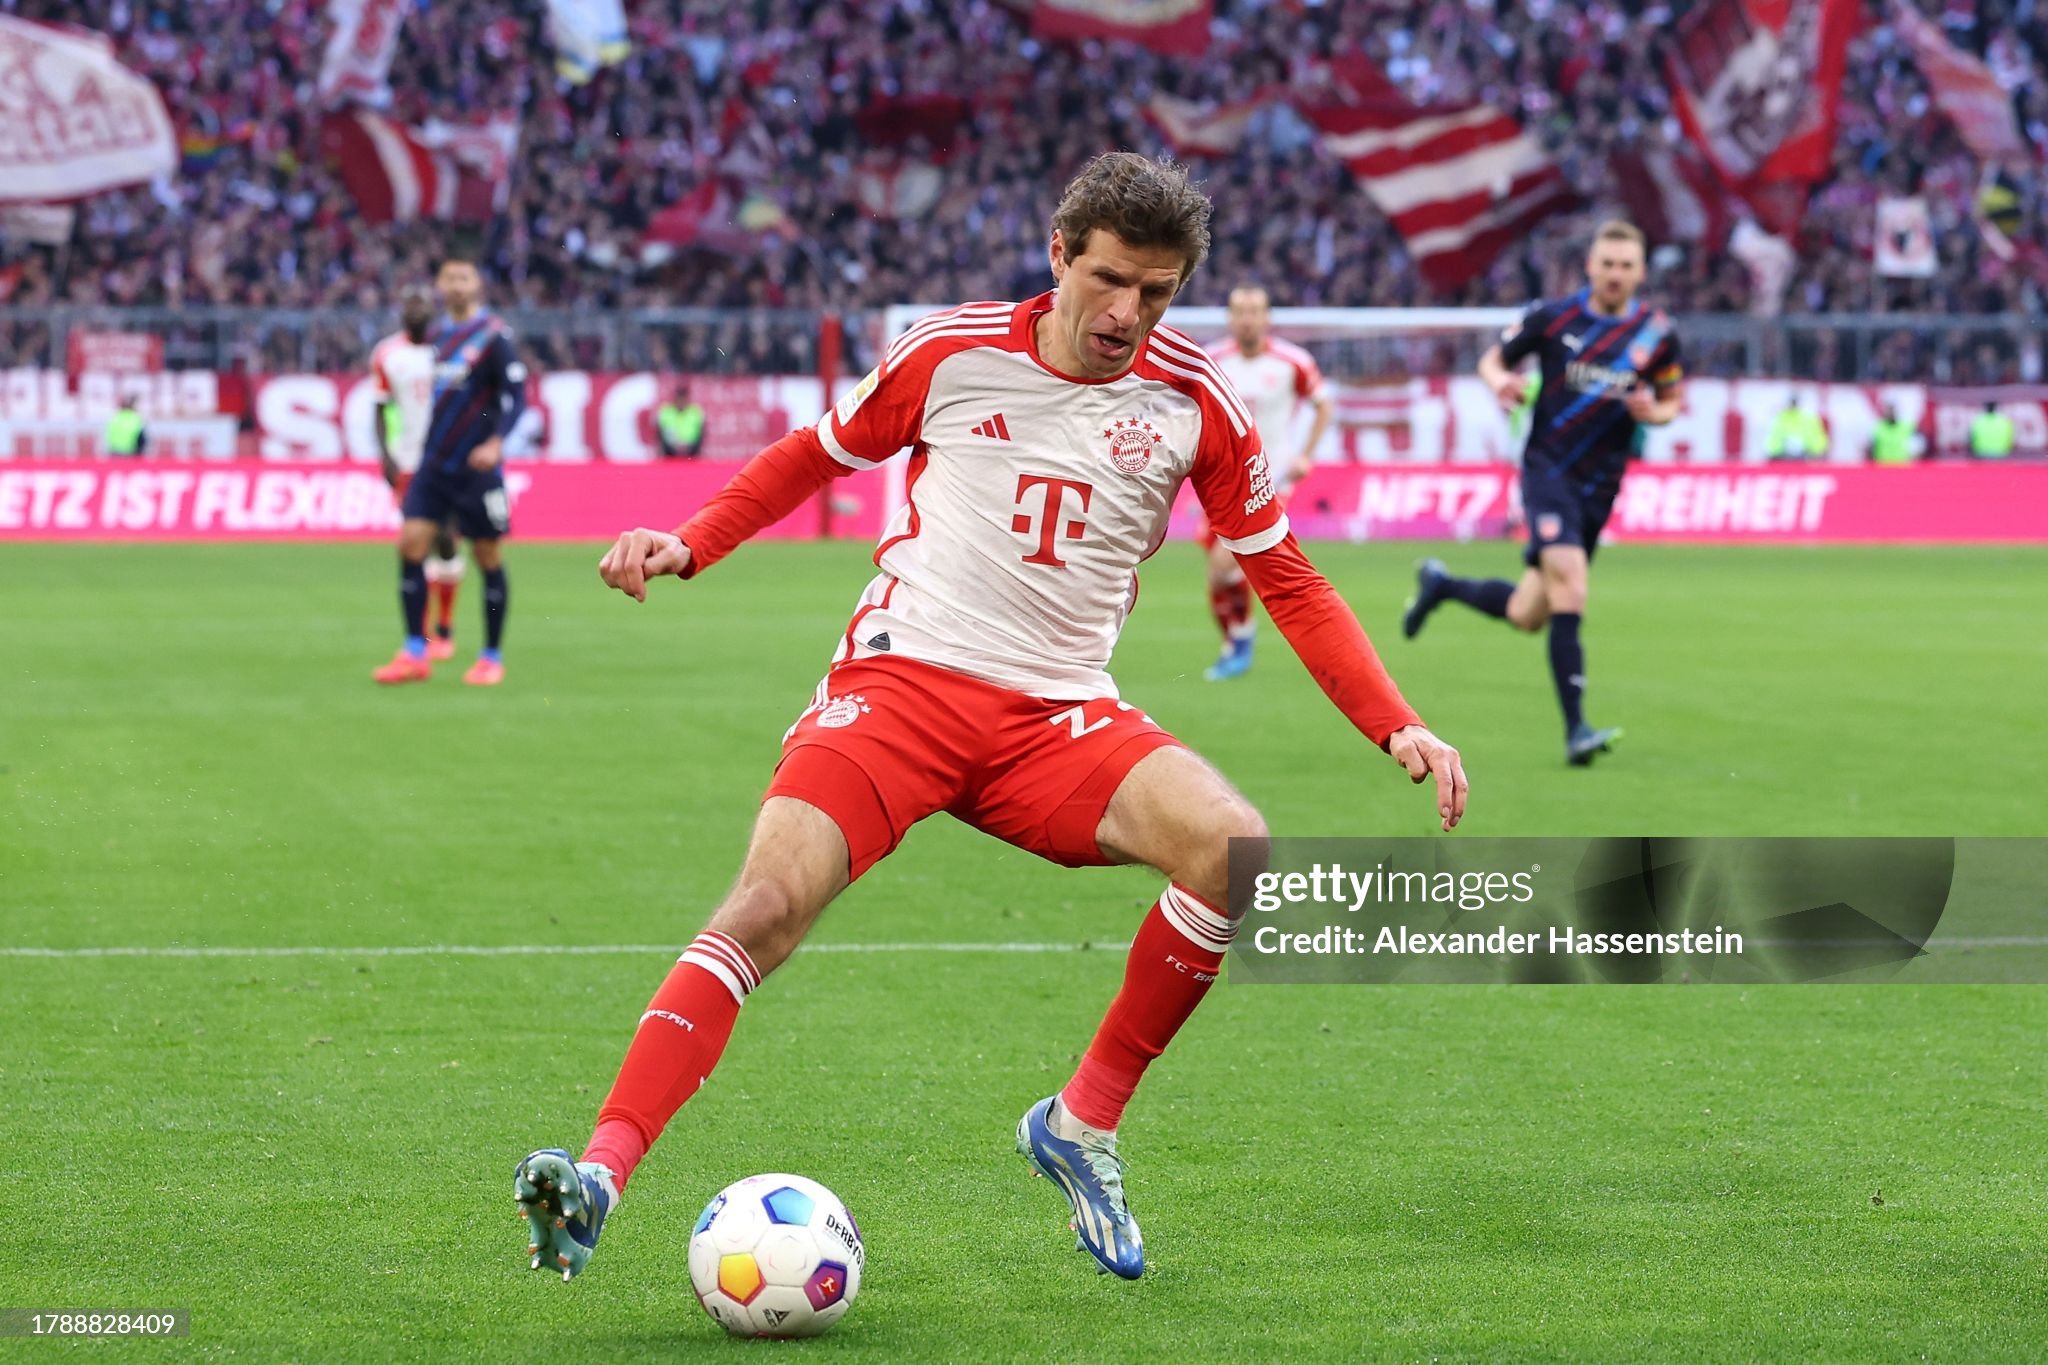 Müller speaks out about future while awaiting conversation with Bayern